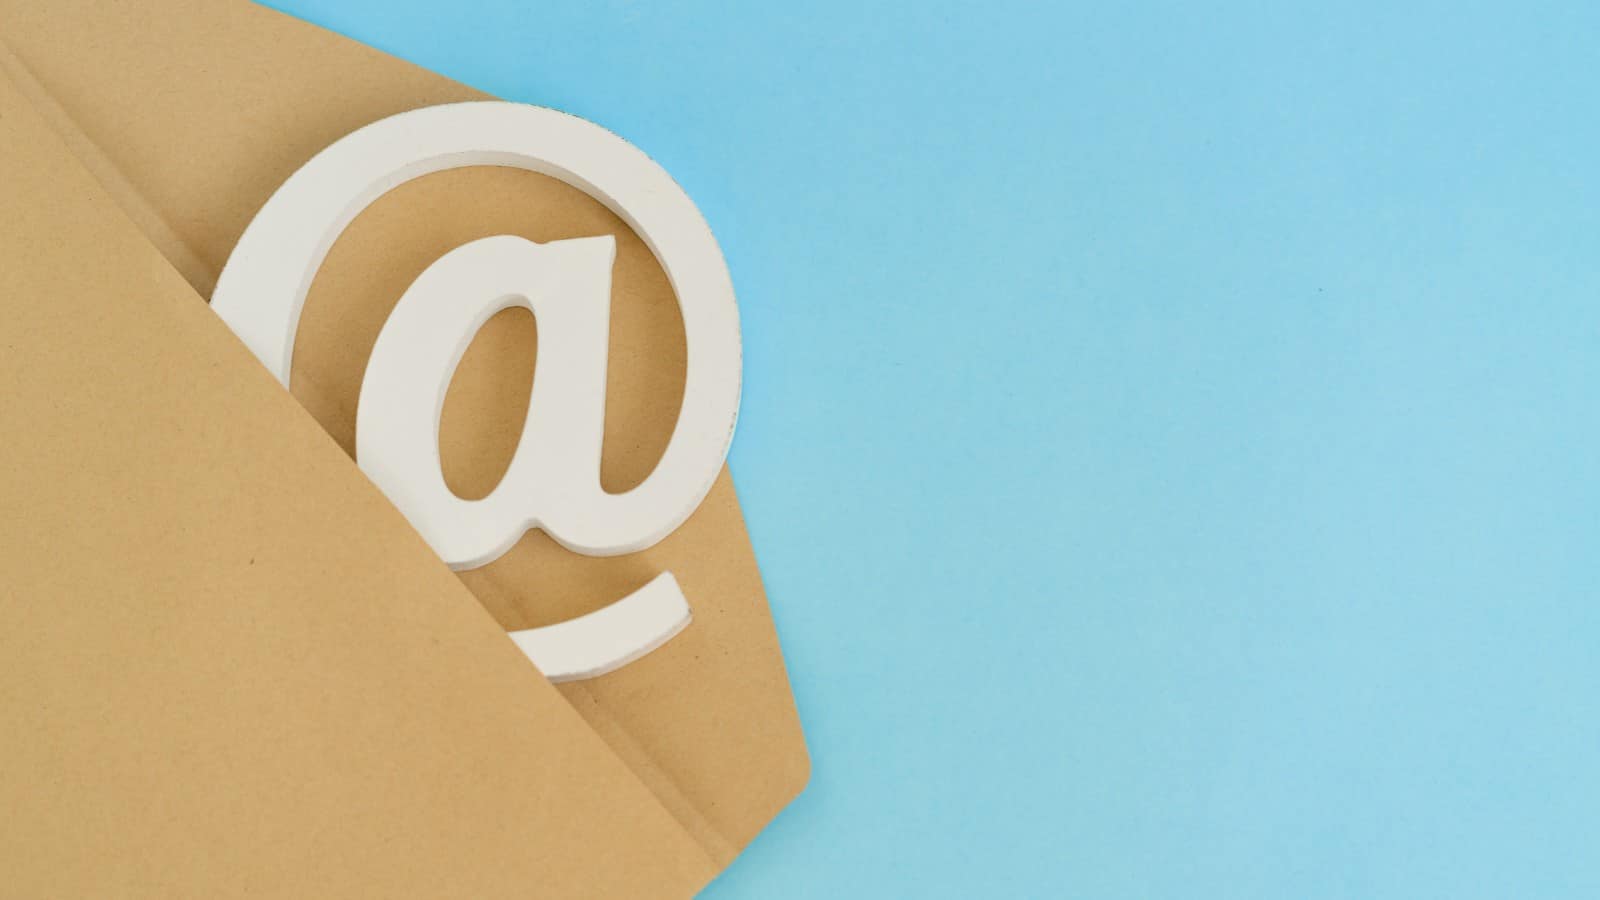 Tips to Keep in Mind When Writing a Professional Email